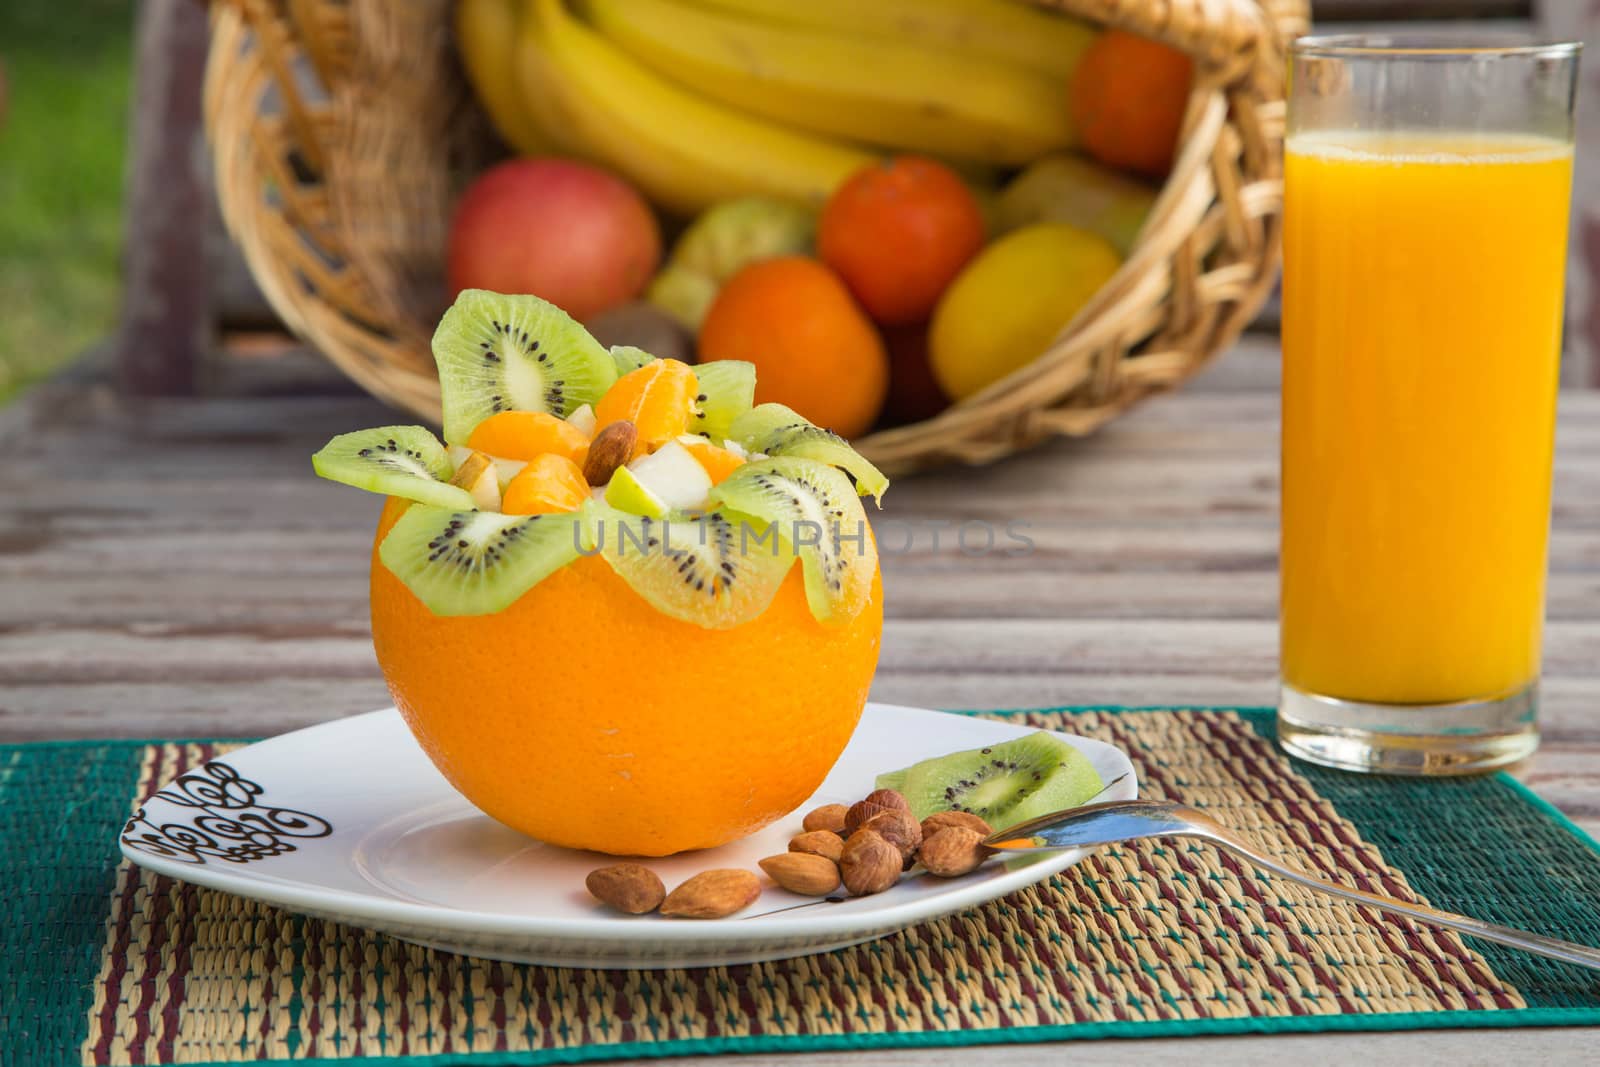 Fruit salad in the orange skin and a glass of fresh orange juice. A basket with exotic fruits in the background